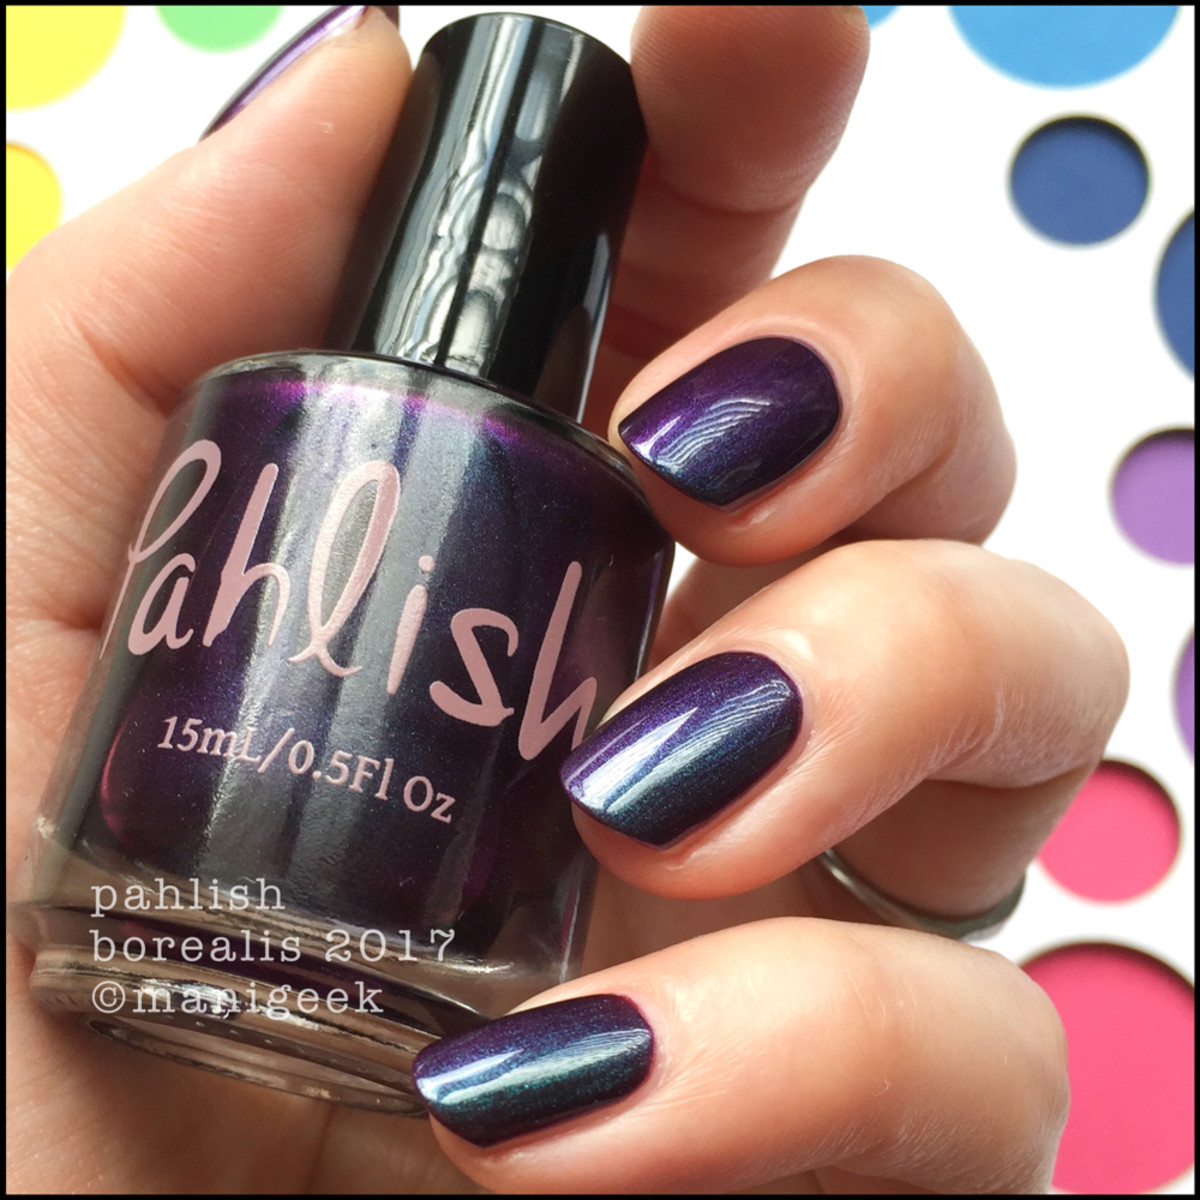 Pahlish Borealis Swatches indoors _ Pahlish August 2017 Swatches Review